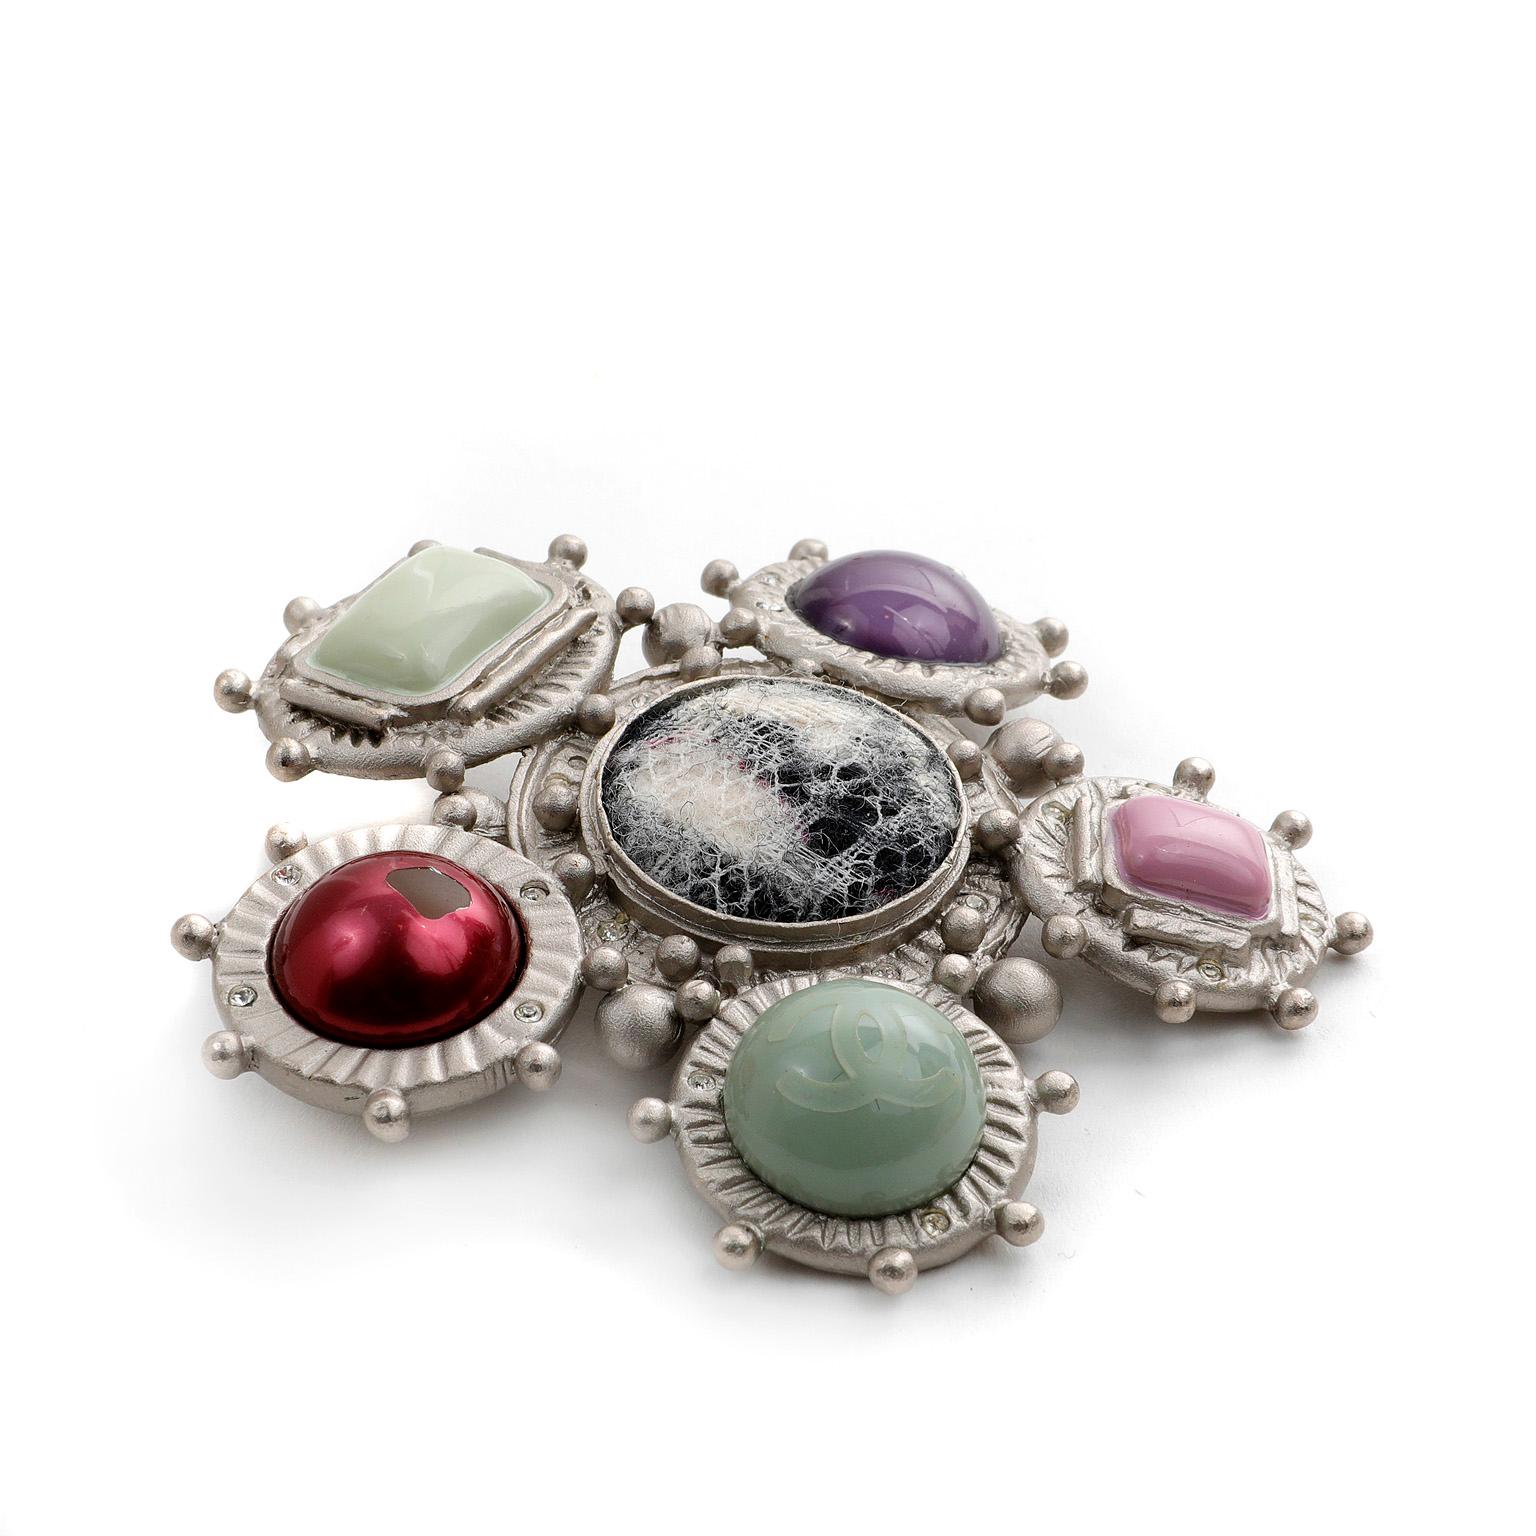 This authentic Chanel Multi Stone and Tweed Pin is in very good condition.  Five stones in different shapes and colors are situated around a central tweed pattern button.  Matte silver tone metal. 

PBF 11052

 